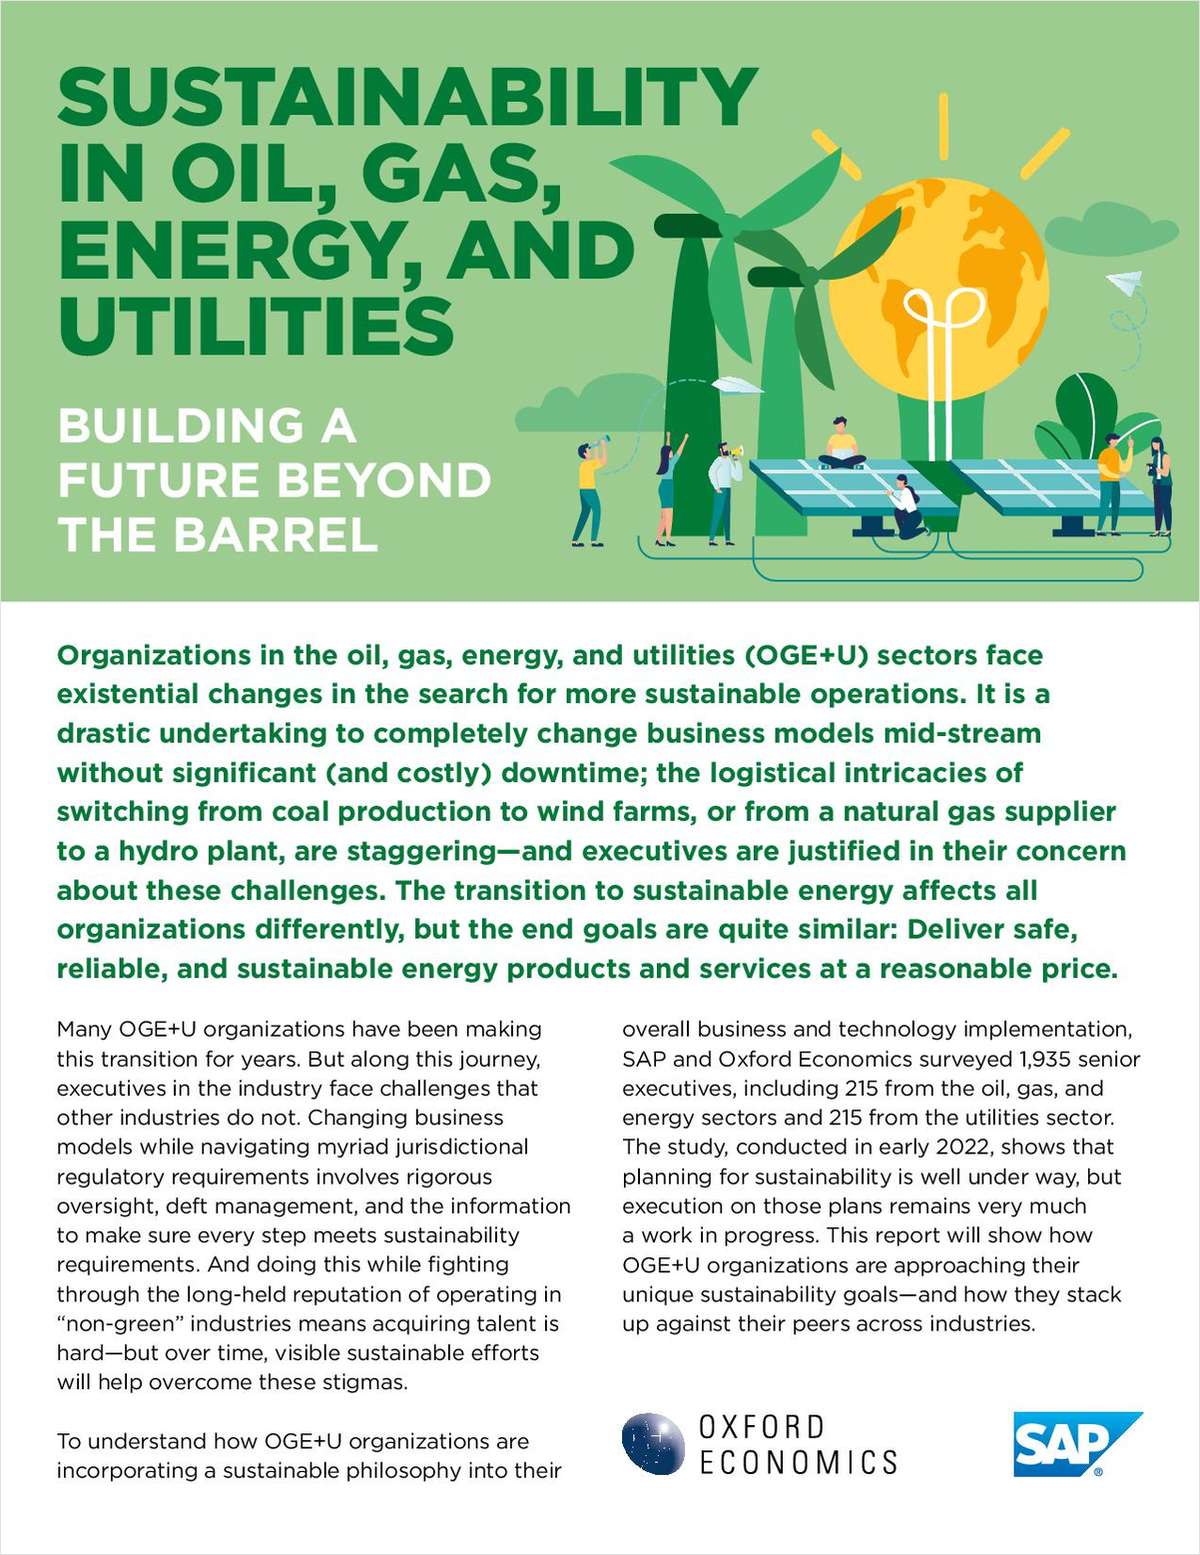 Oxford Economics - Sustainability in Oil, Gas, Energy, and Utilities: Building a Future Beyond the Barrel